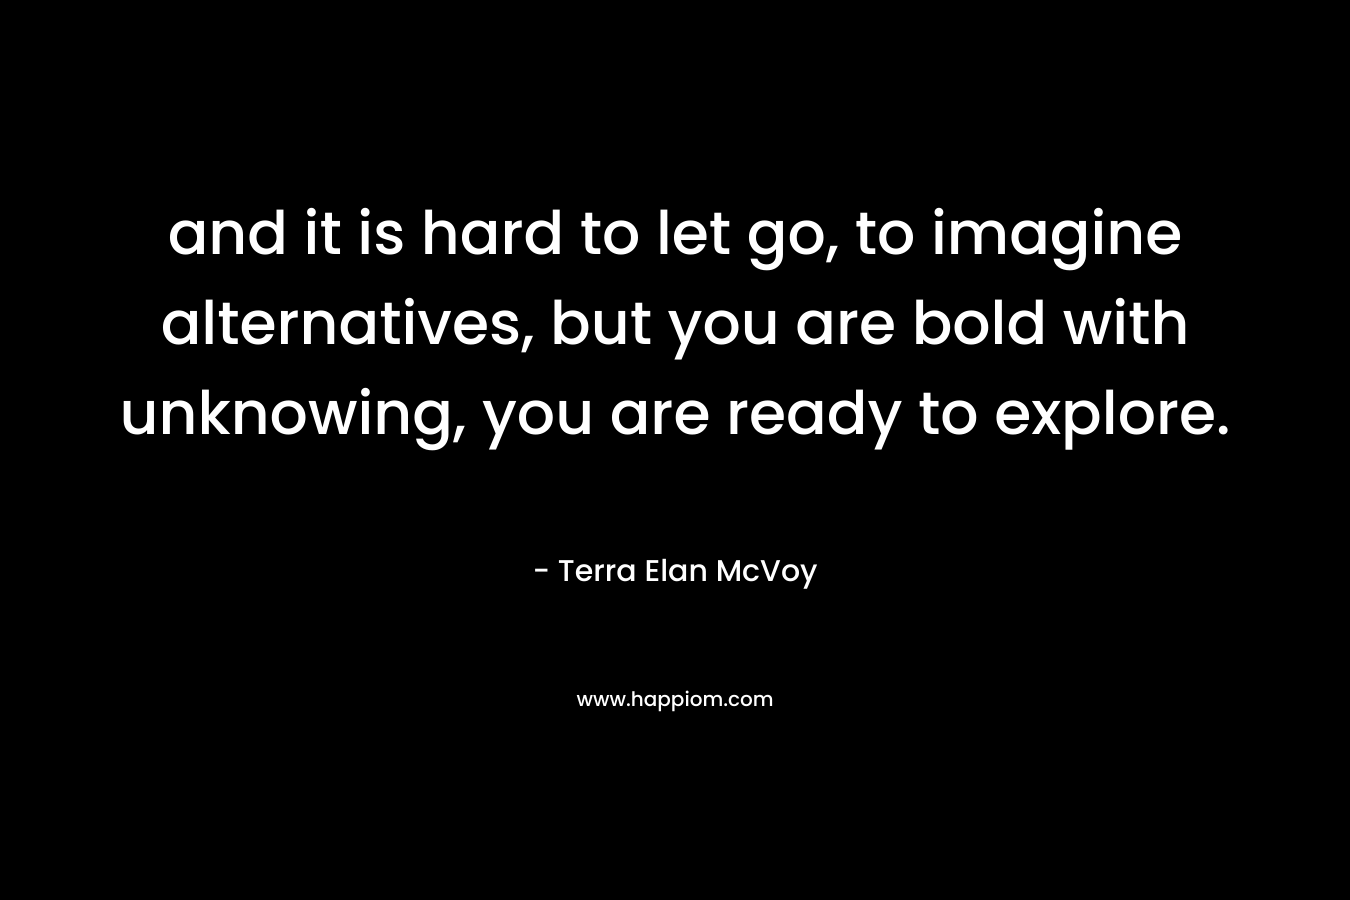 and it is hard to let go, to imagine alternatives, but you are bold with unknowing, you are ready to explore. – Terra Elan McVoy